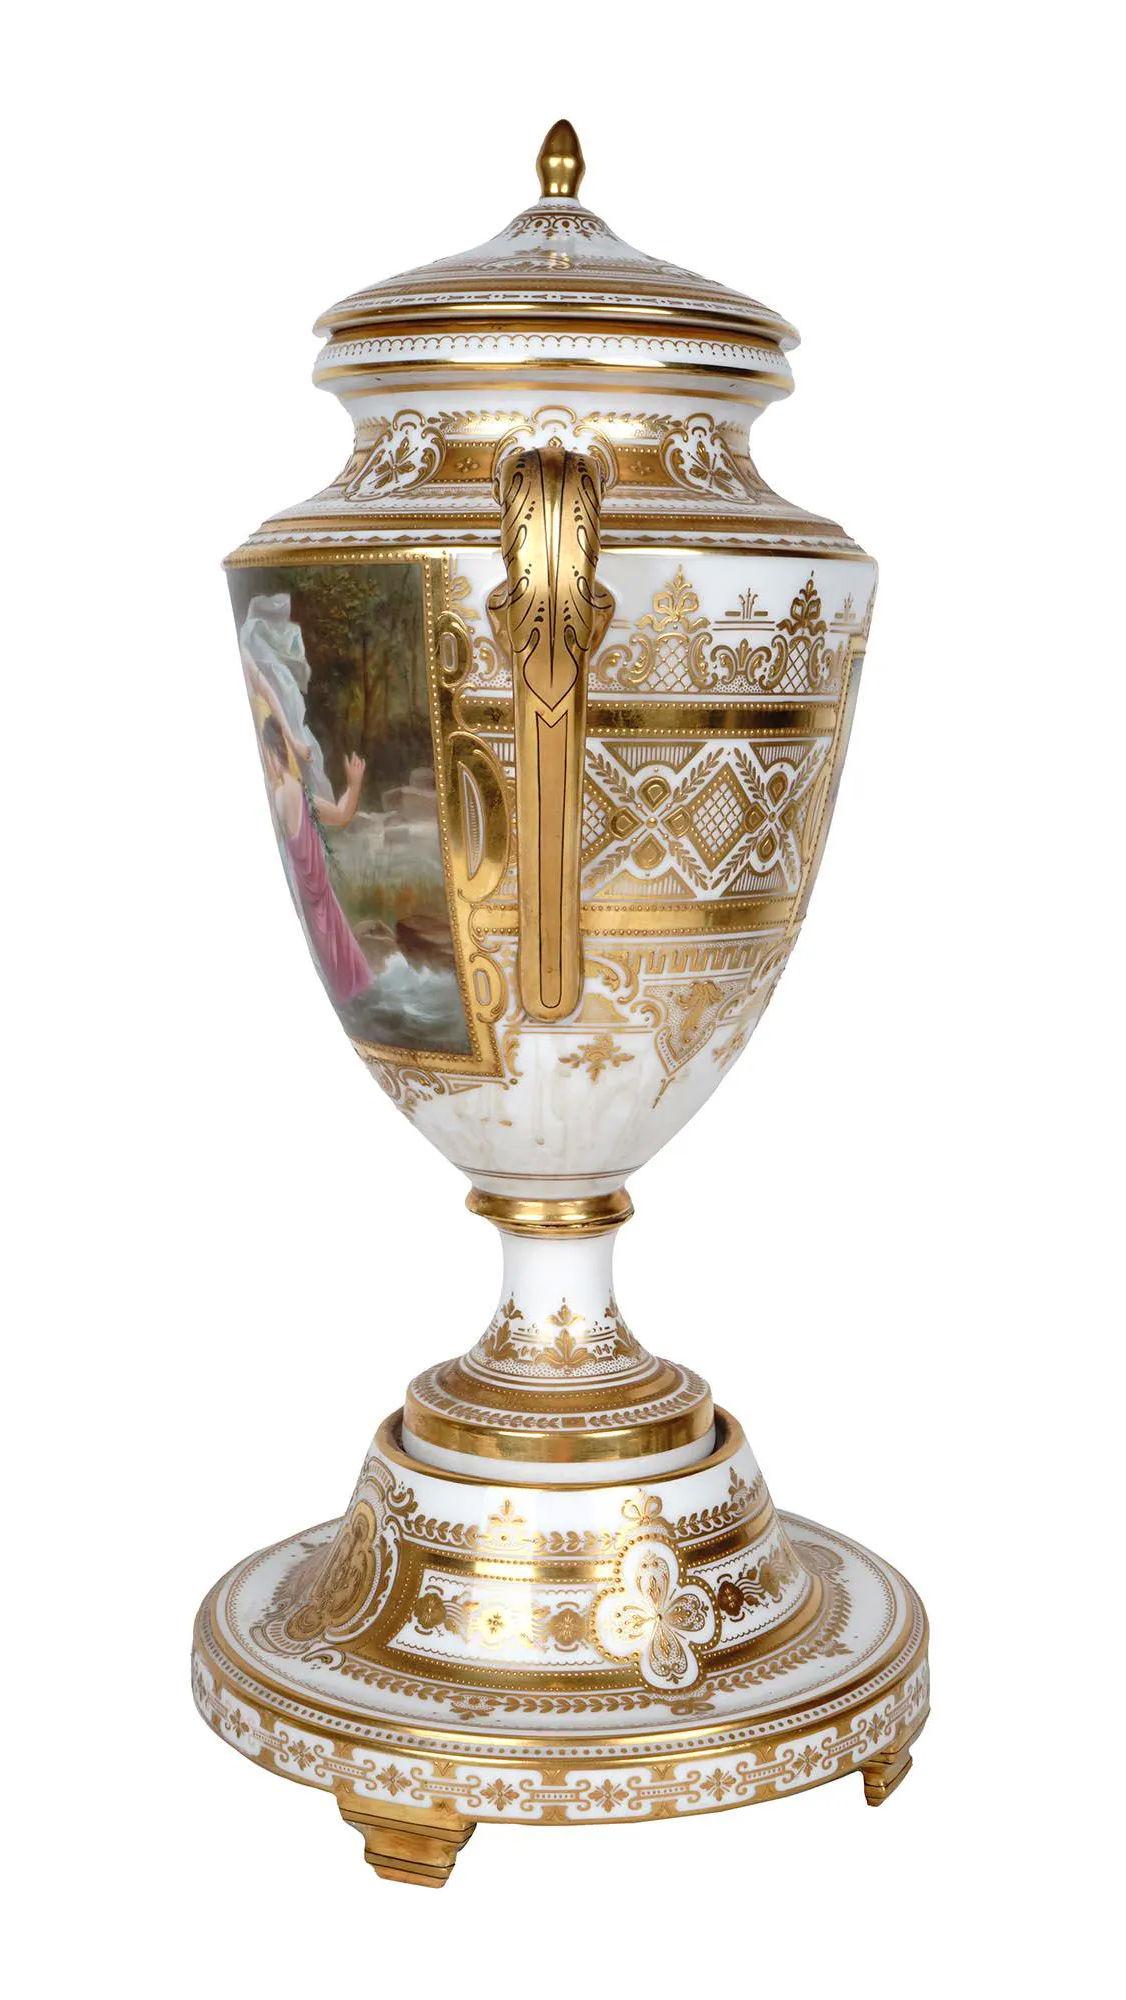 Our beautiful vase with cover from Vienna features finely painted cartouches depicting maidens signed Habel (or Haibel) and extensive gilding. With blue shield underglaze mark in blue and red marks 2086 with the title, Die Perle (The Pearl).